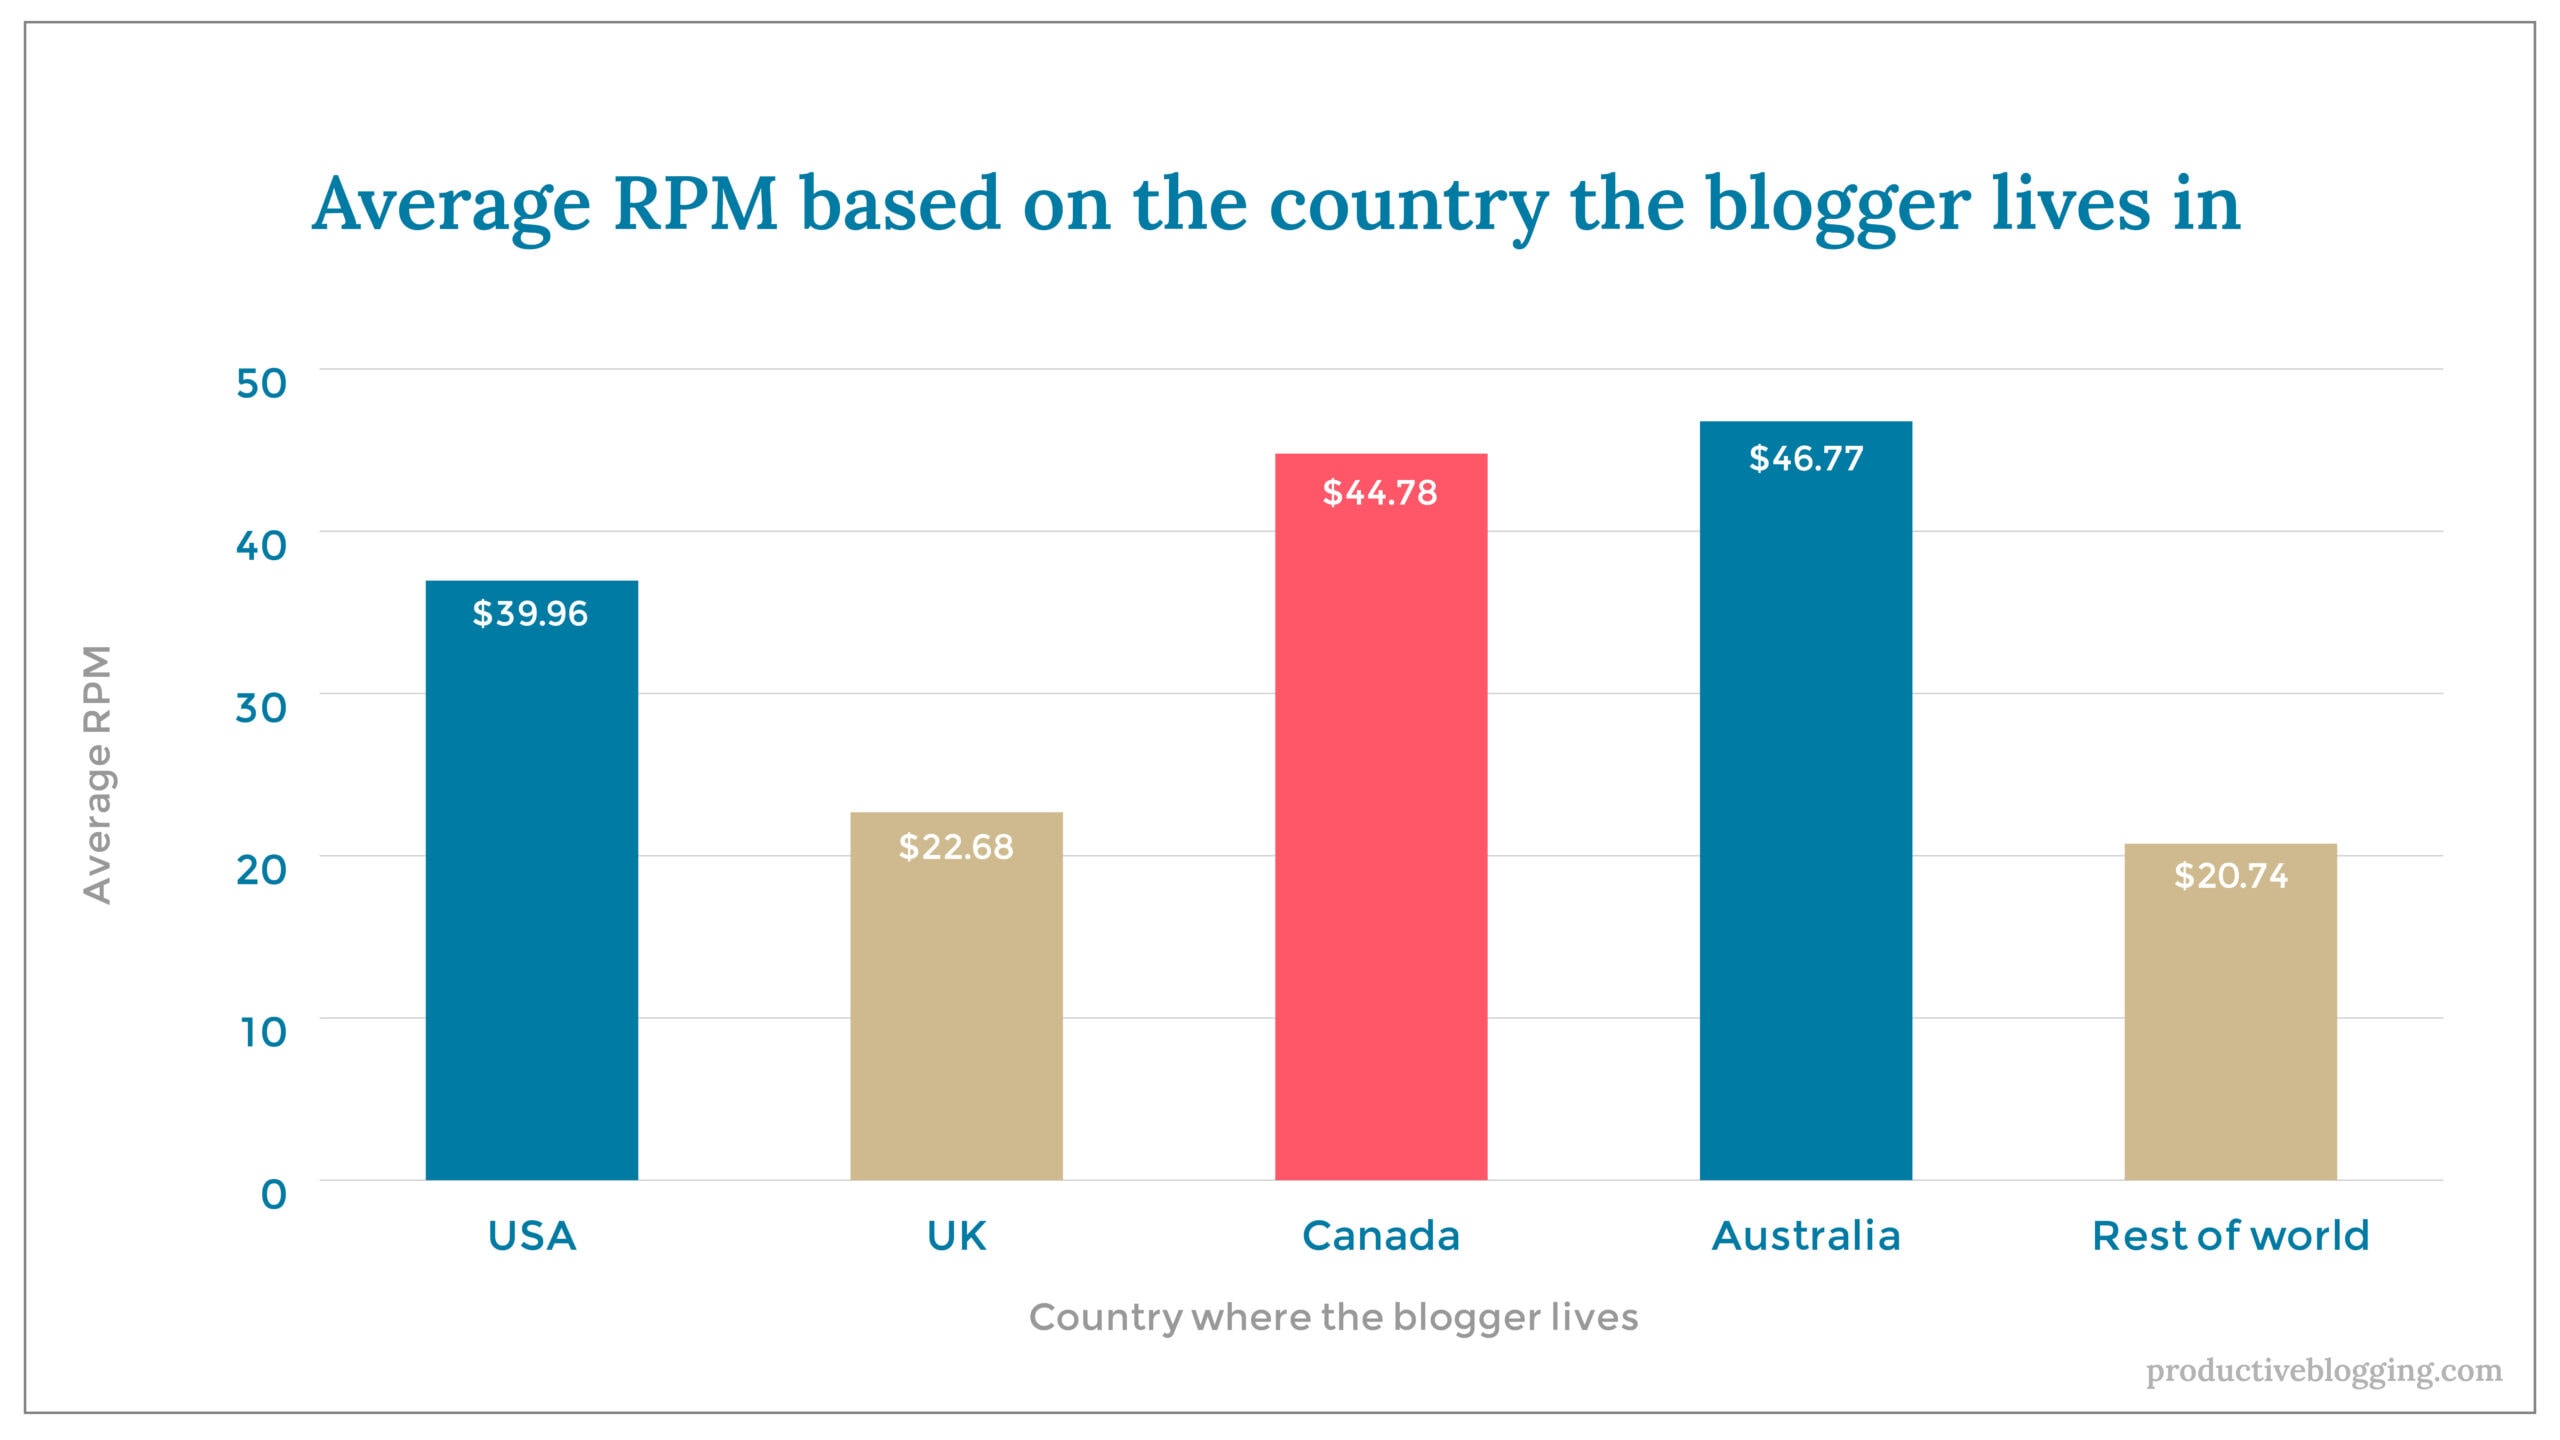 Average RPM based on the country the blogger lives in X axis: Country where the blogger lives Y axis: Average RPM USA $36.96 UK $22.68 Canada $44.78 Australia $46.77 Rest of world $20.74